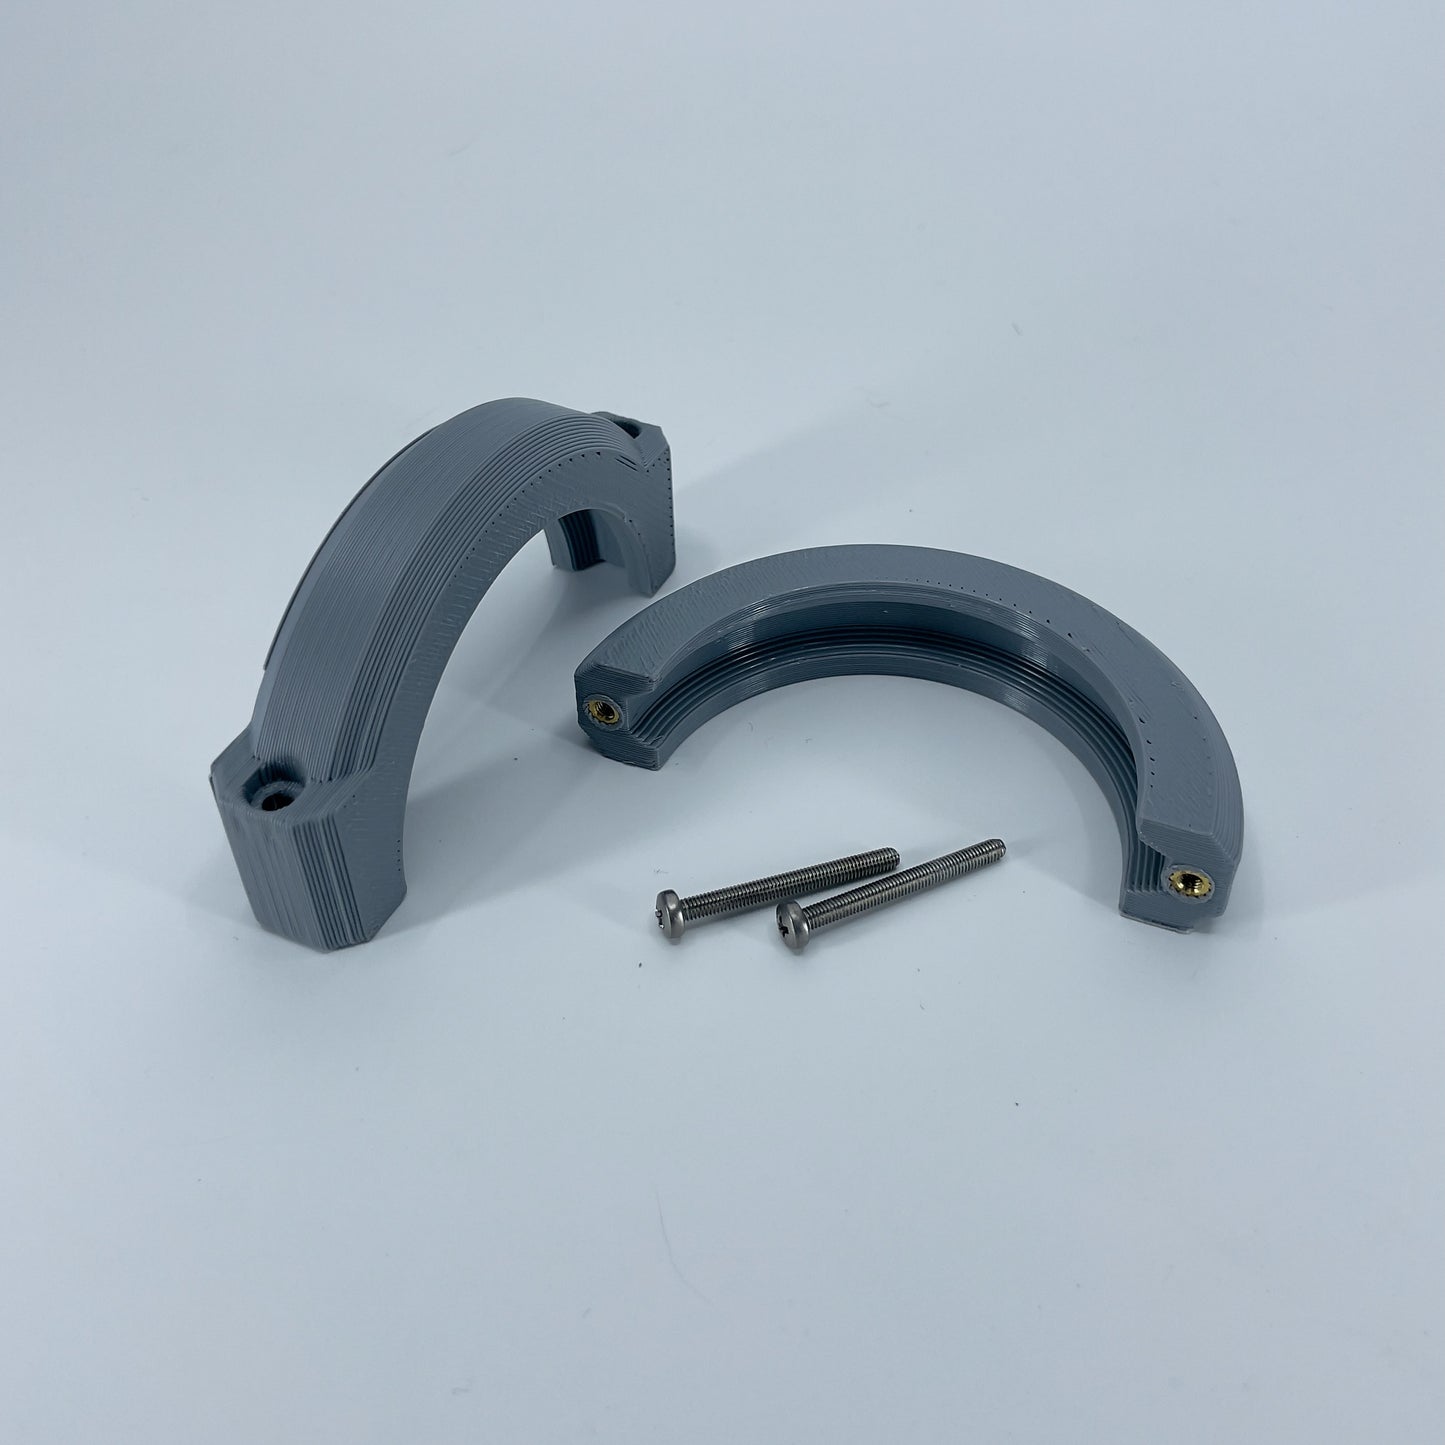 Secondary Distributer Head Clamp